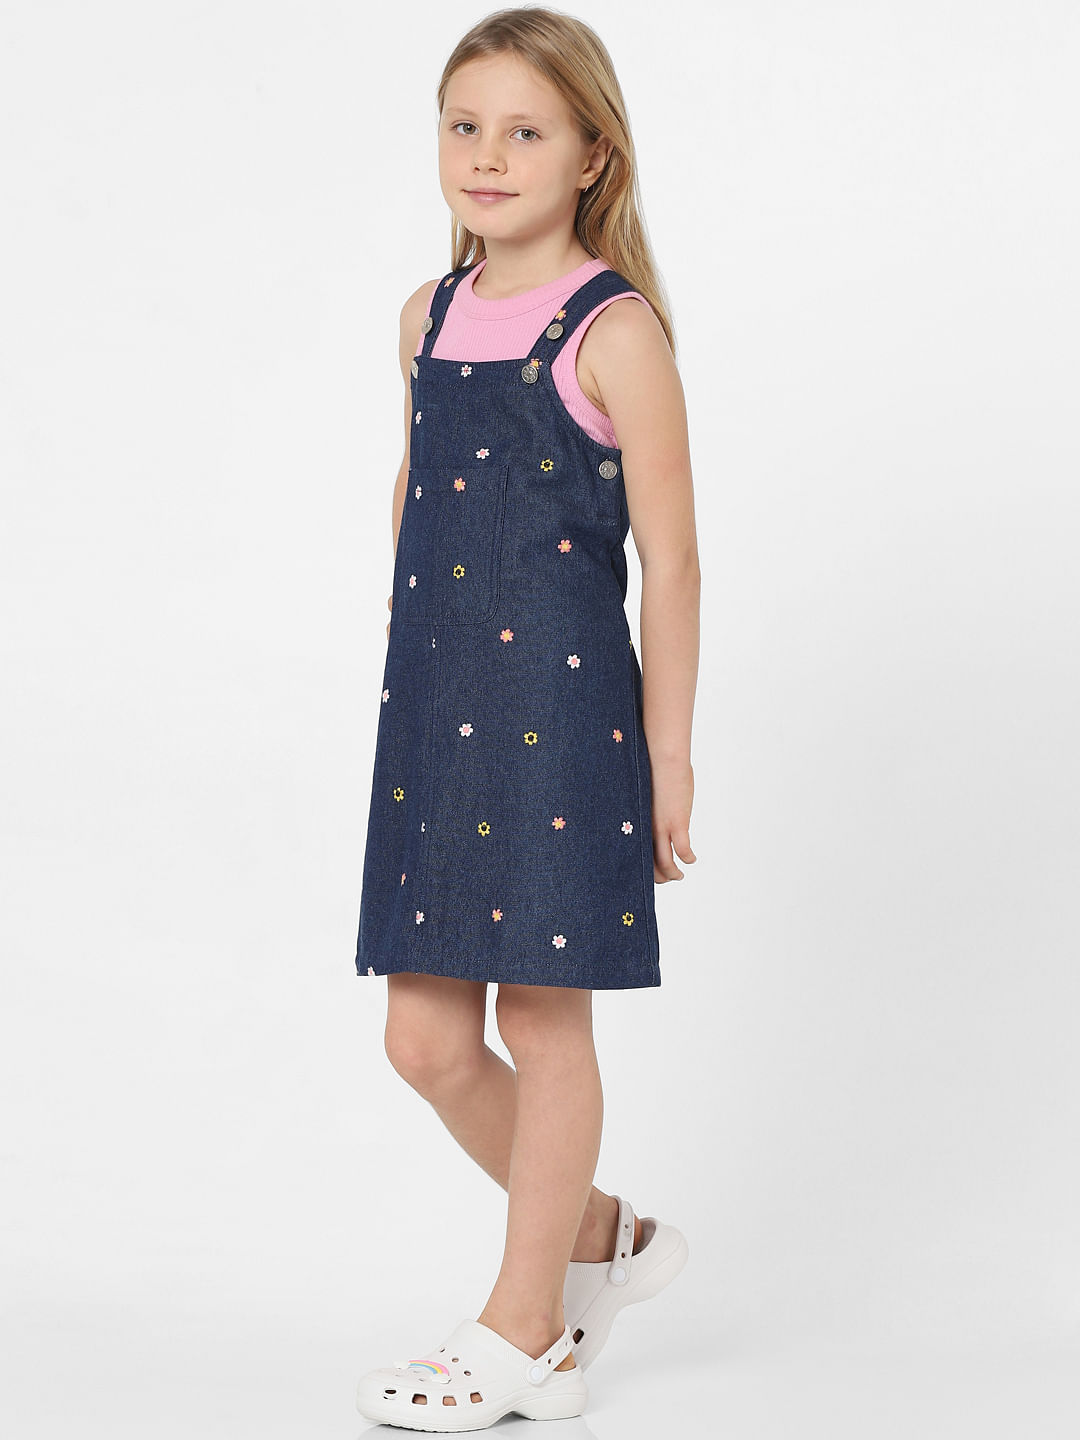 Buy Enfance Half Sleeves Striped Designed Top With Denim Dungaree Styles  Dress Green for Girls (4-5Years) Online in India, Shop at FirstCry.com -  14559754